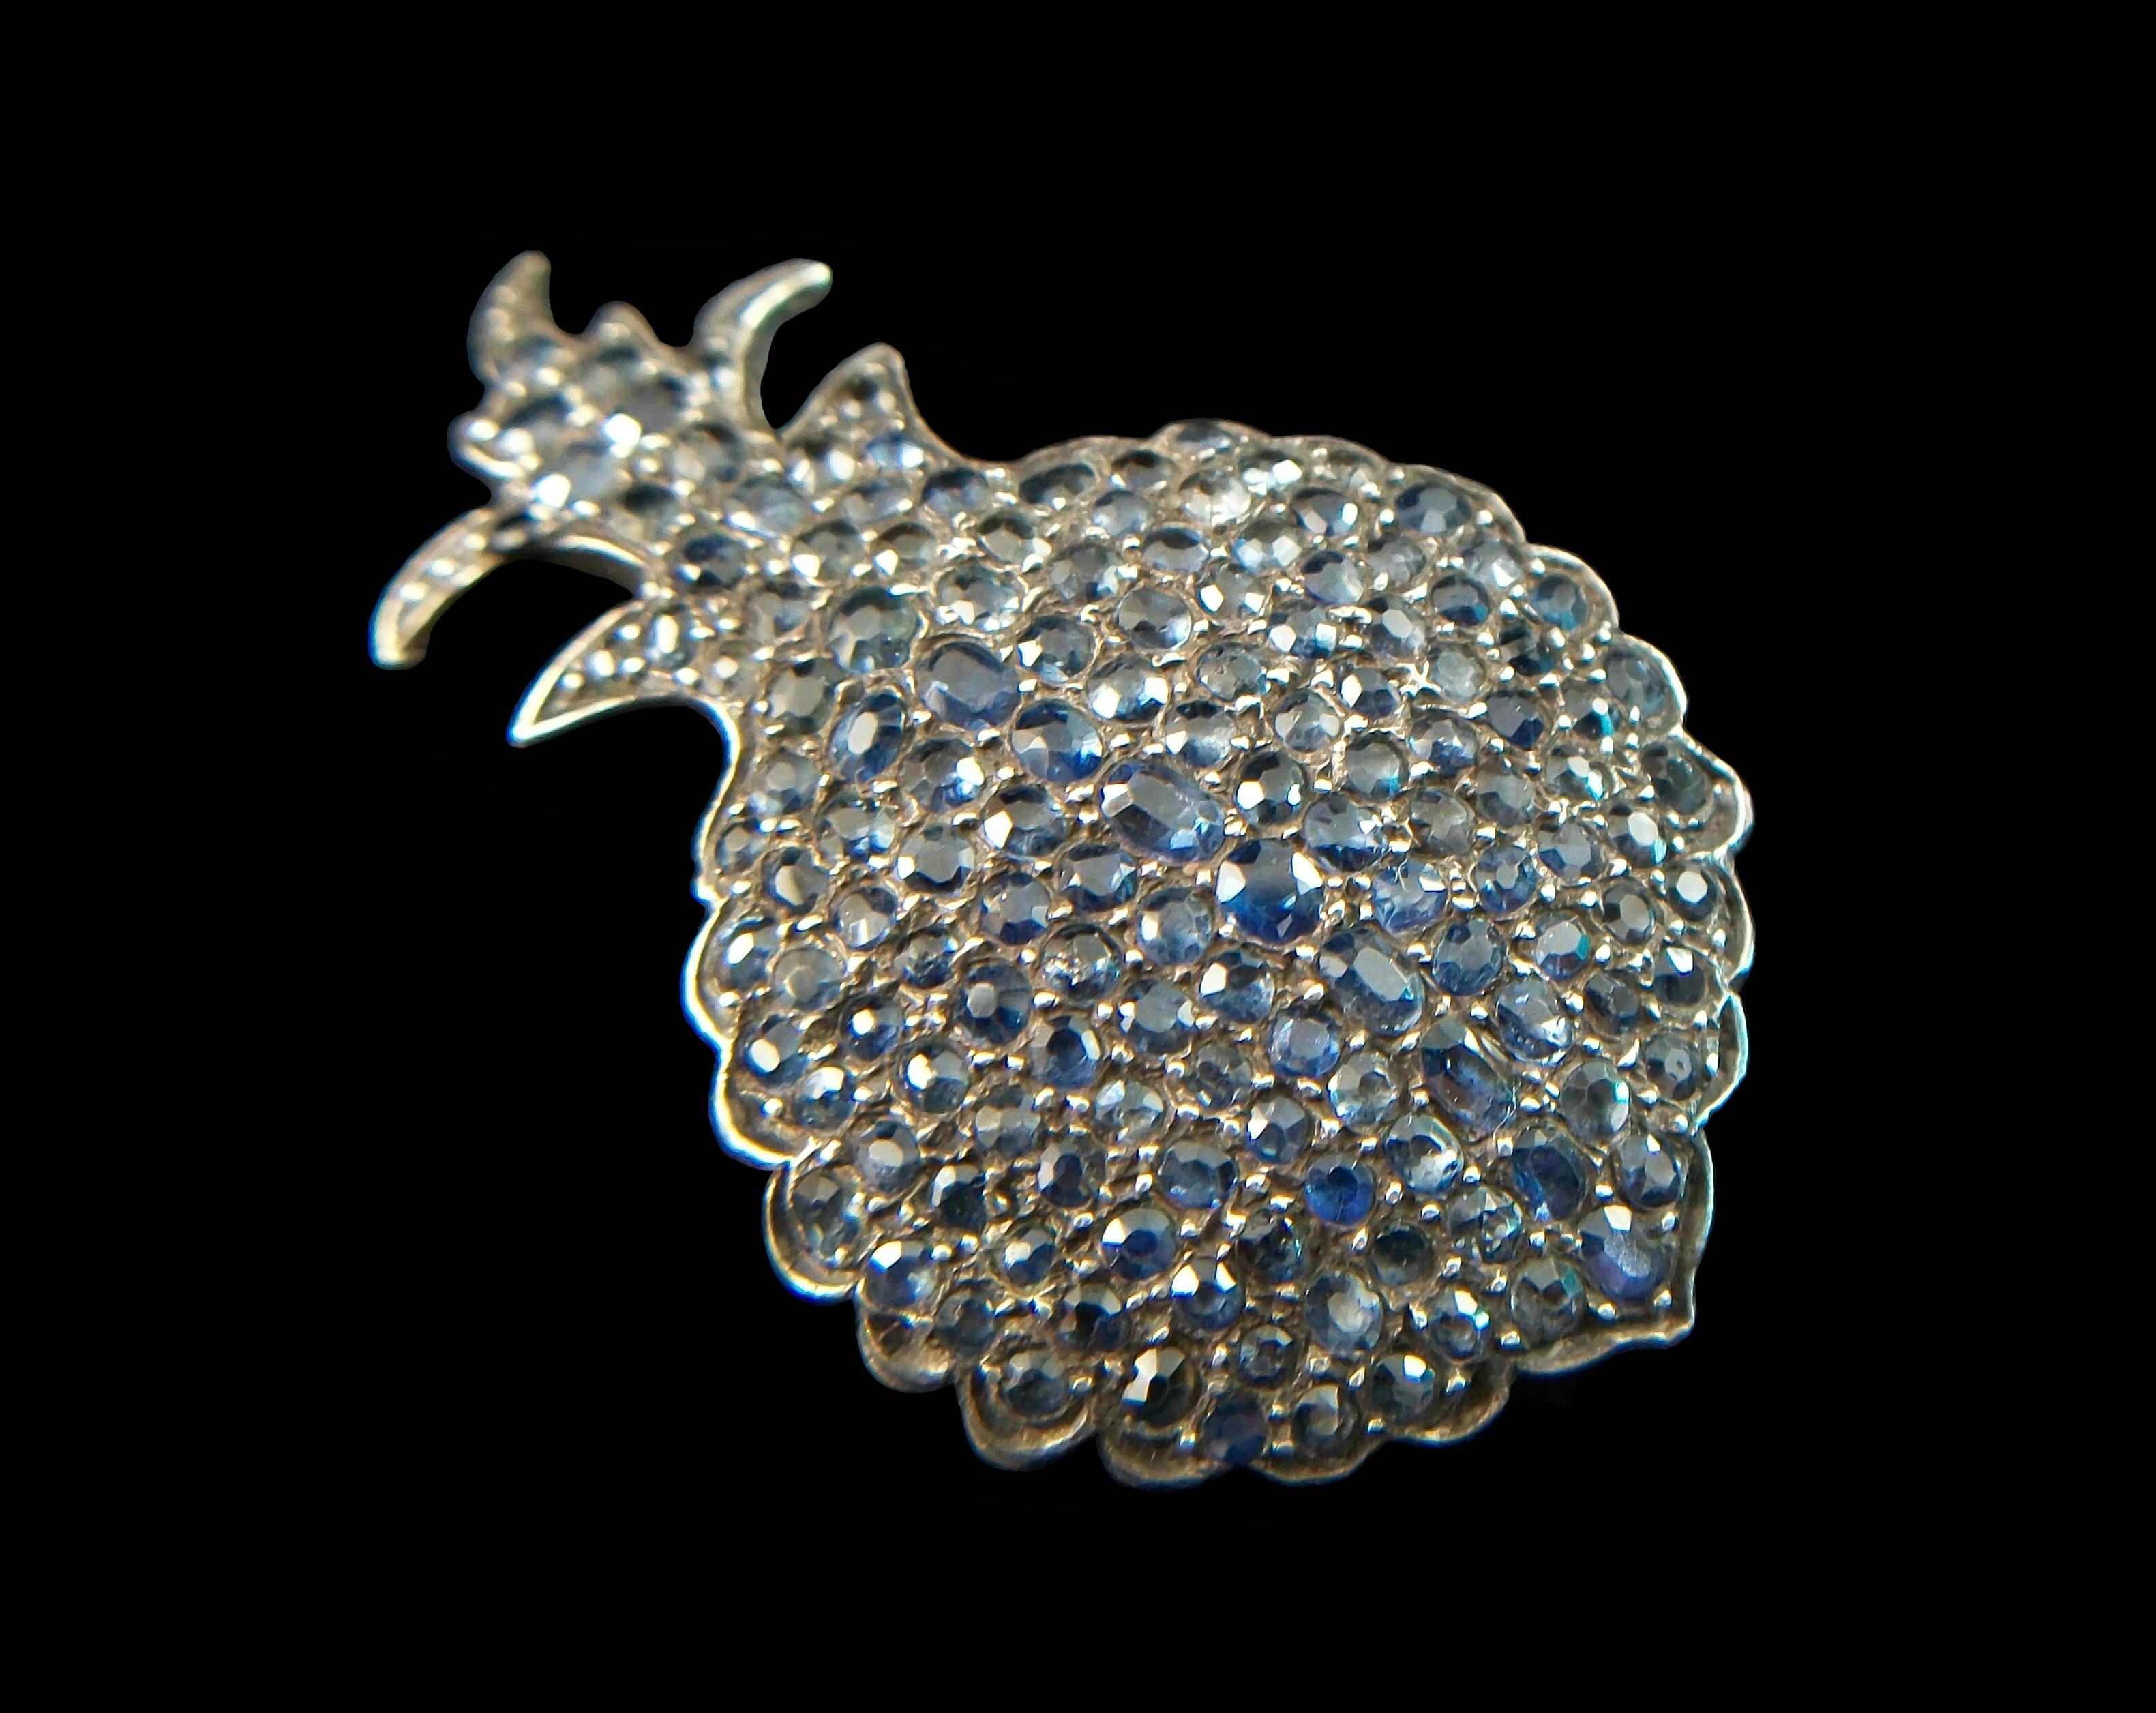 
Rare and impressive antique pavé set Sapphire convex pineapple brooch - featuring a cascade of old oval and round cut prong set sapphires (approx. 10.48 total carat weight - 143 sapphire count - the majority being 2.0 mm in diameter) - hand made